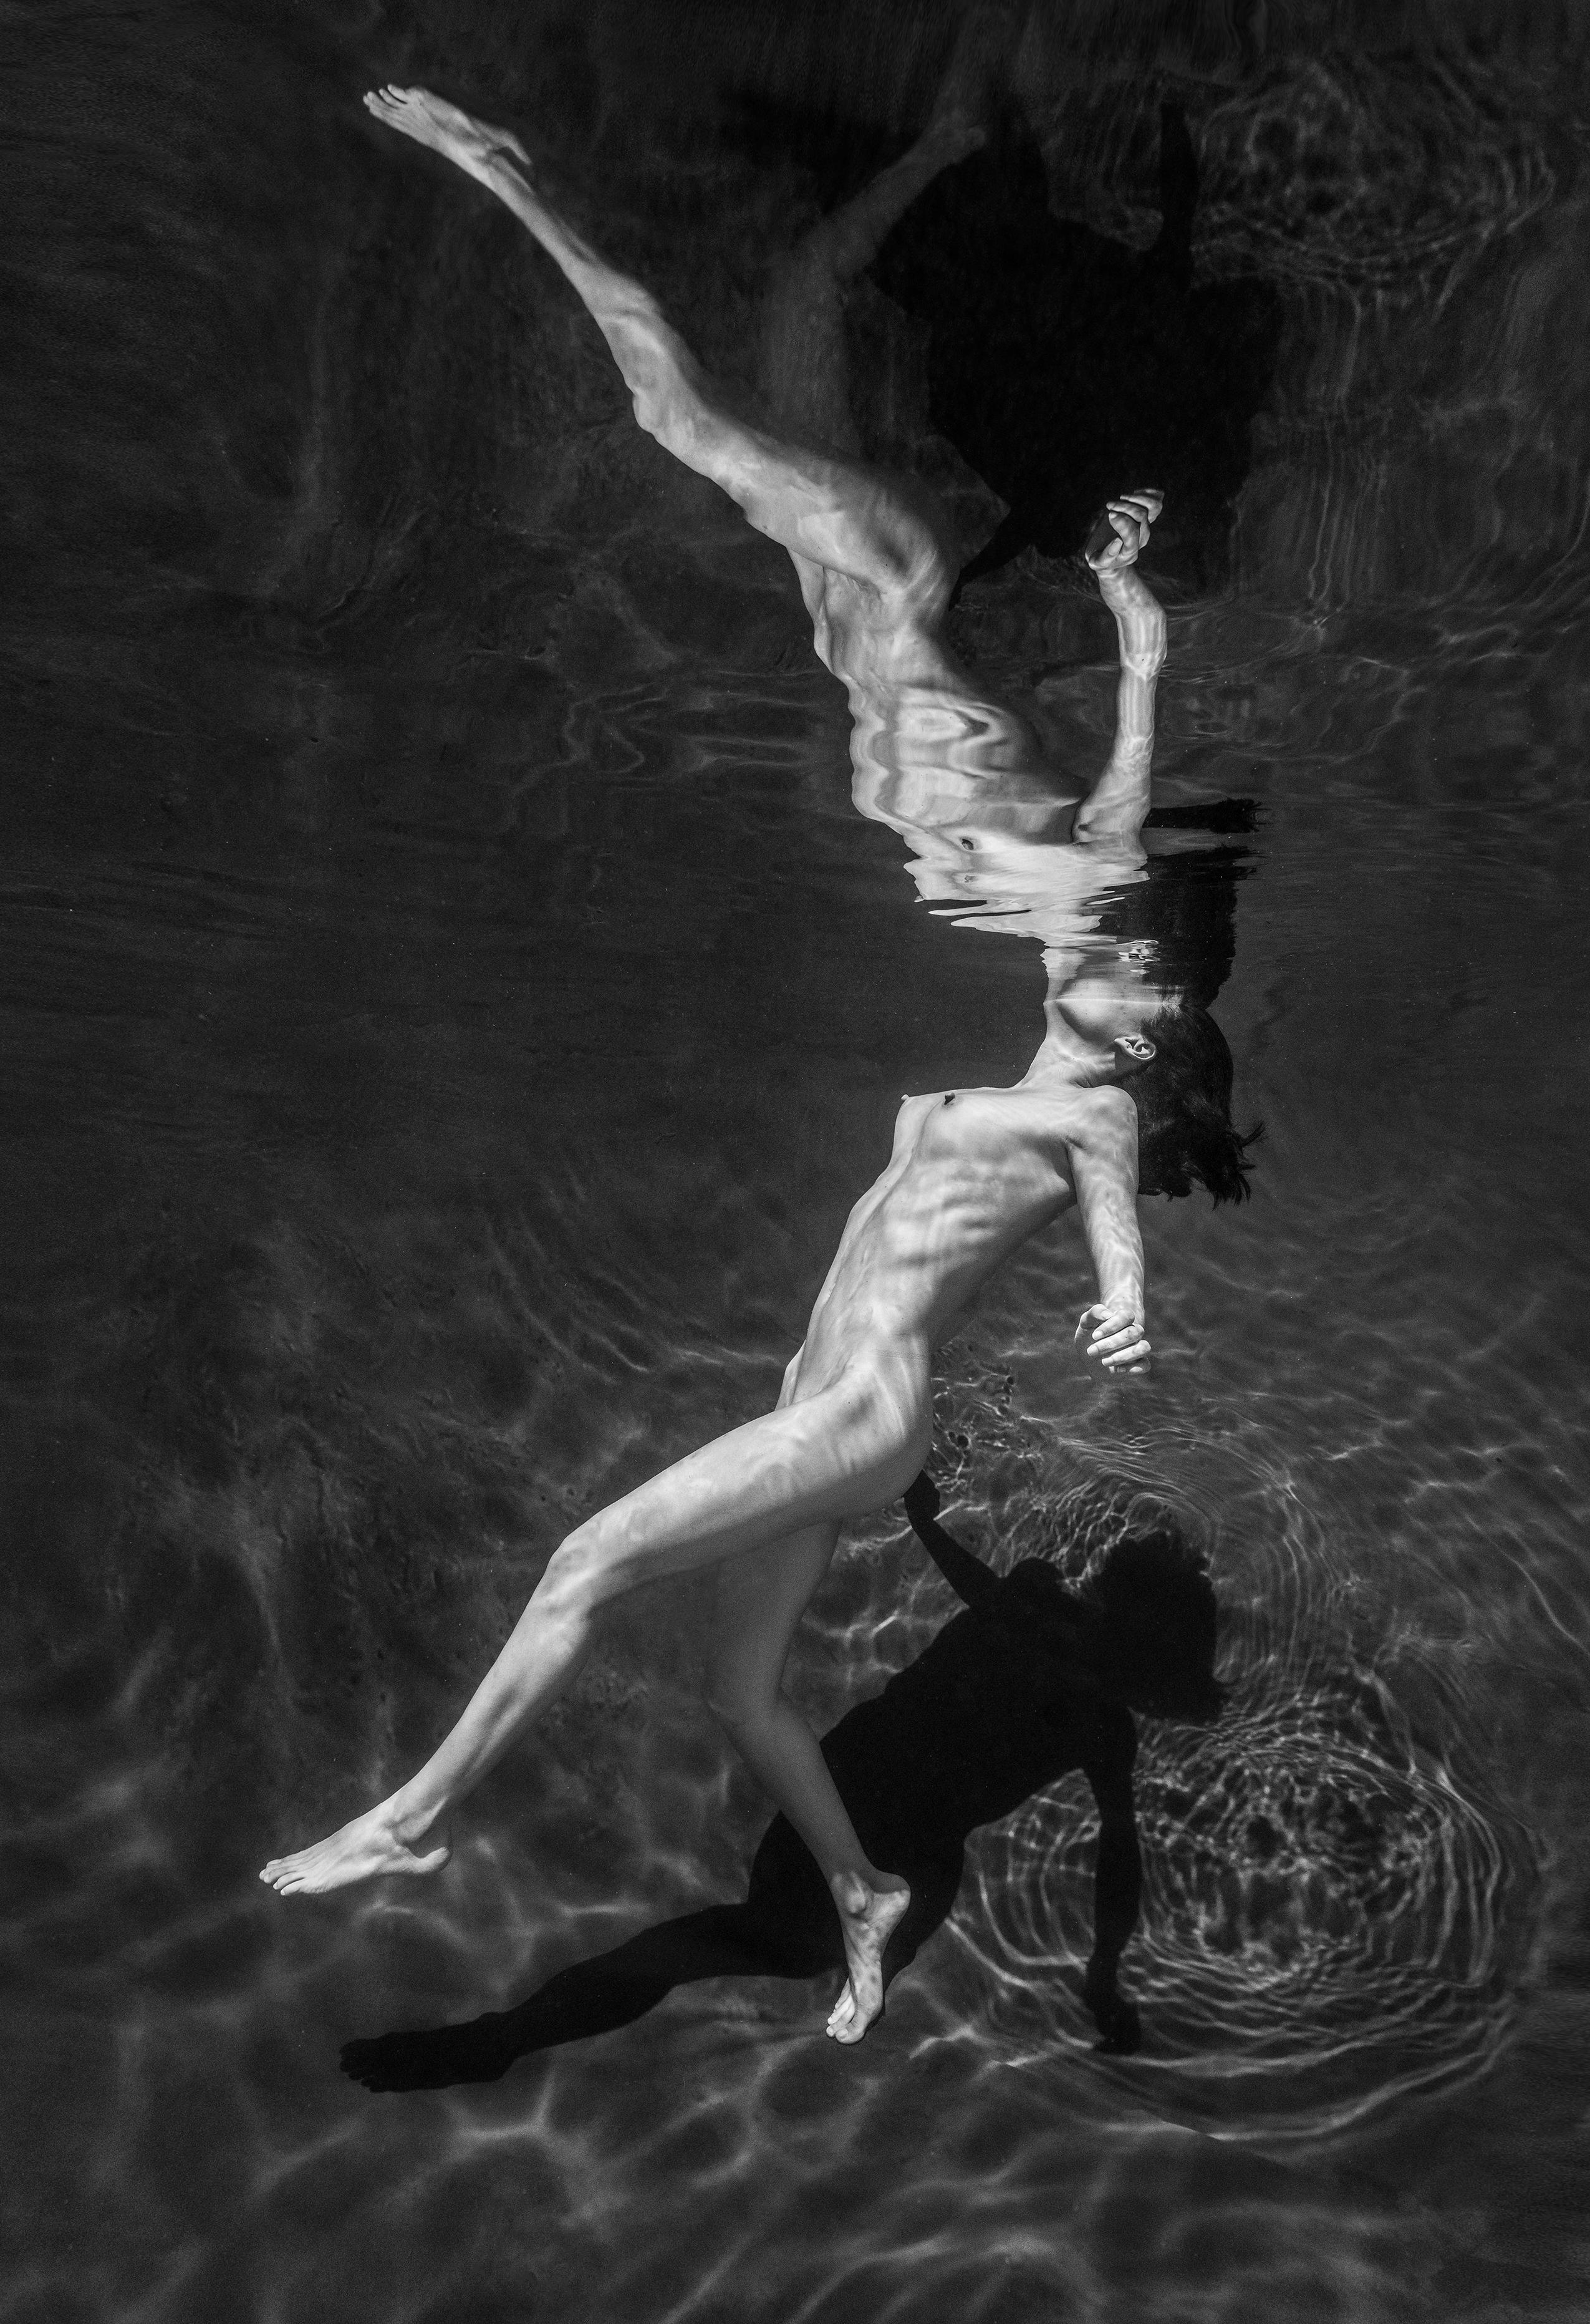 Alex Sher Black and White Photograph - Balance - underwater nude b&w photograph - archival pigment 35 x 24"